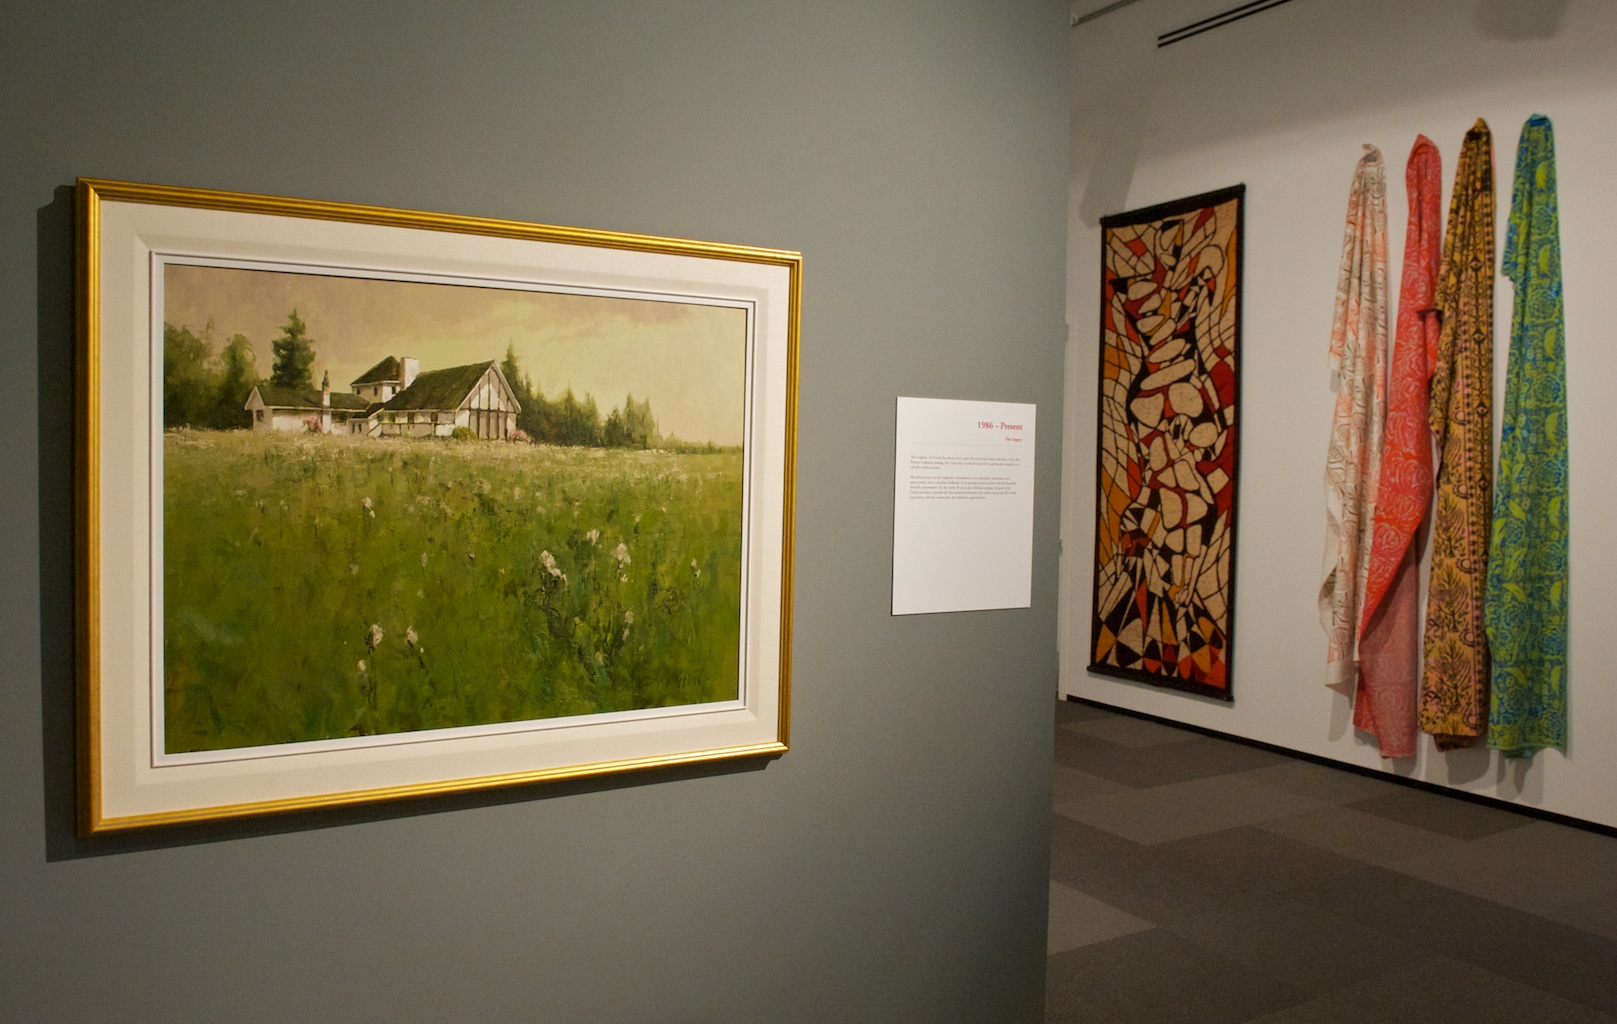 Made For This Place: The Art, Architecture and Artifacts of the Leighton Legacy. June 6 - July 19, 2014
Organized by the Leighton Arts Centre in collaboration with the Nickle Galleries, curated by Stephanie Doll.  Photo: Dave Brown, LCR Photo Services.